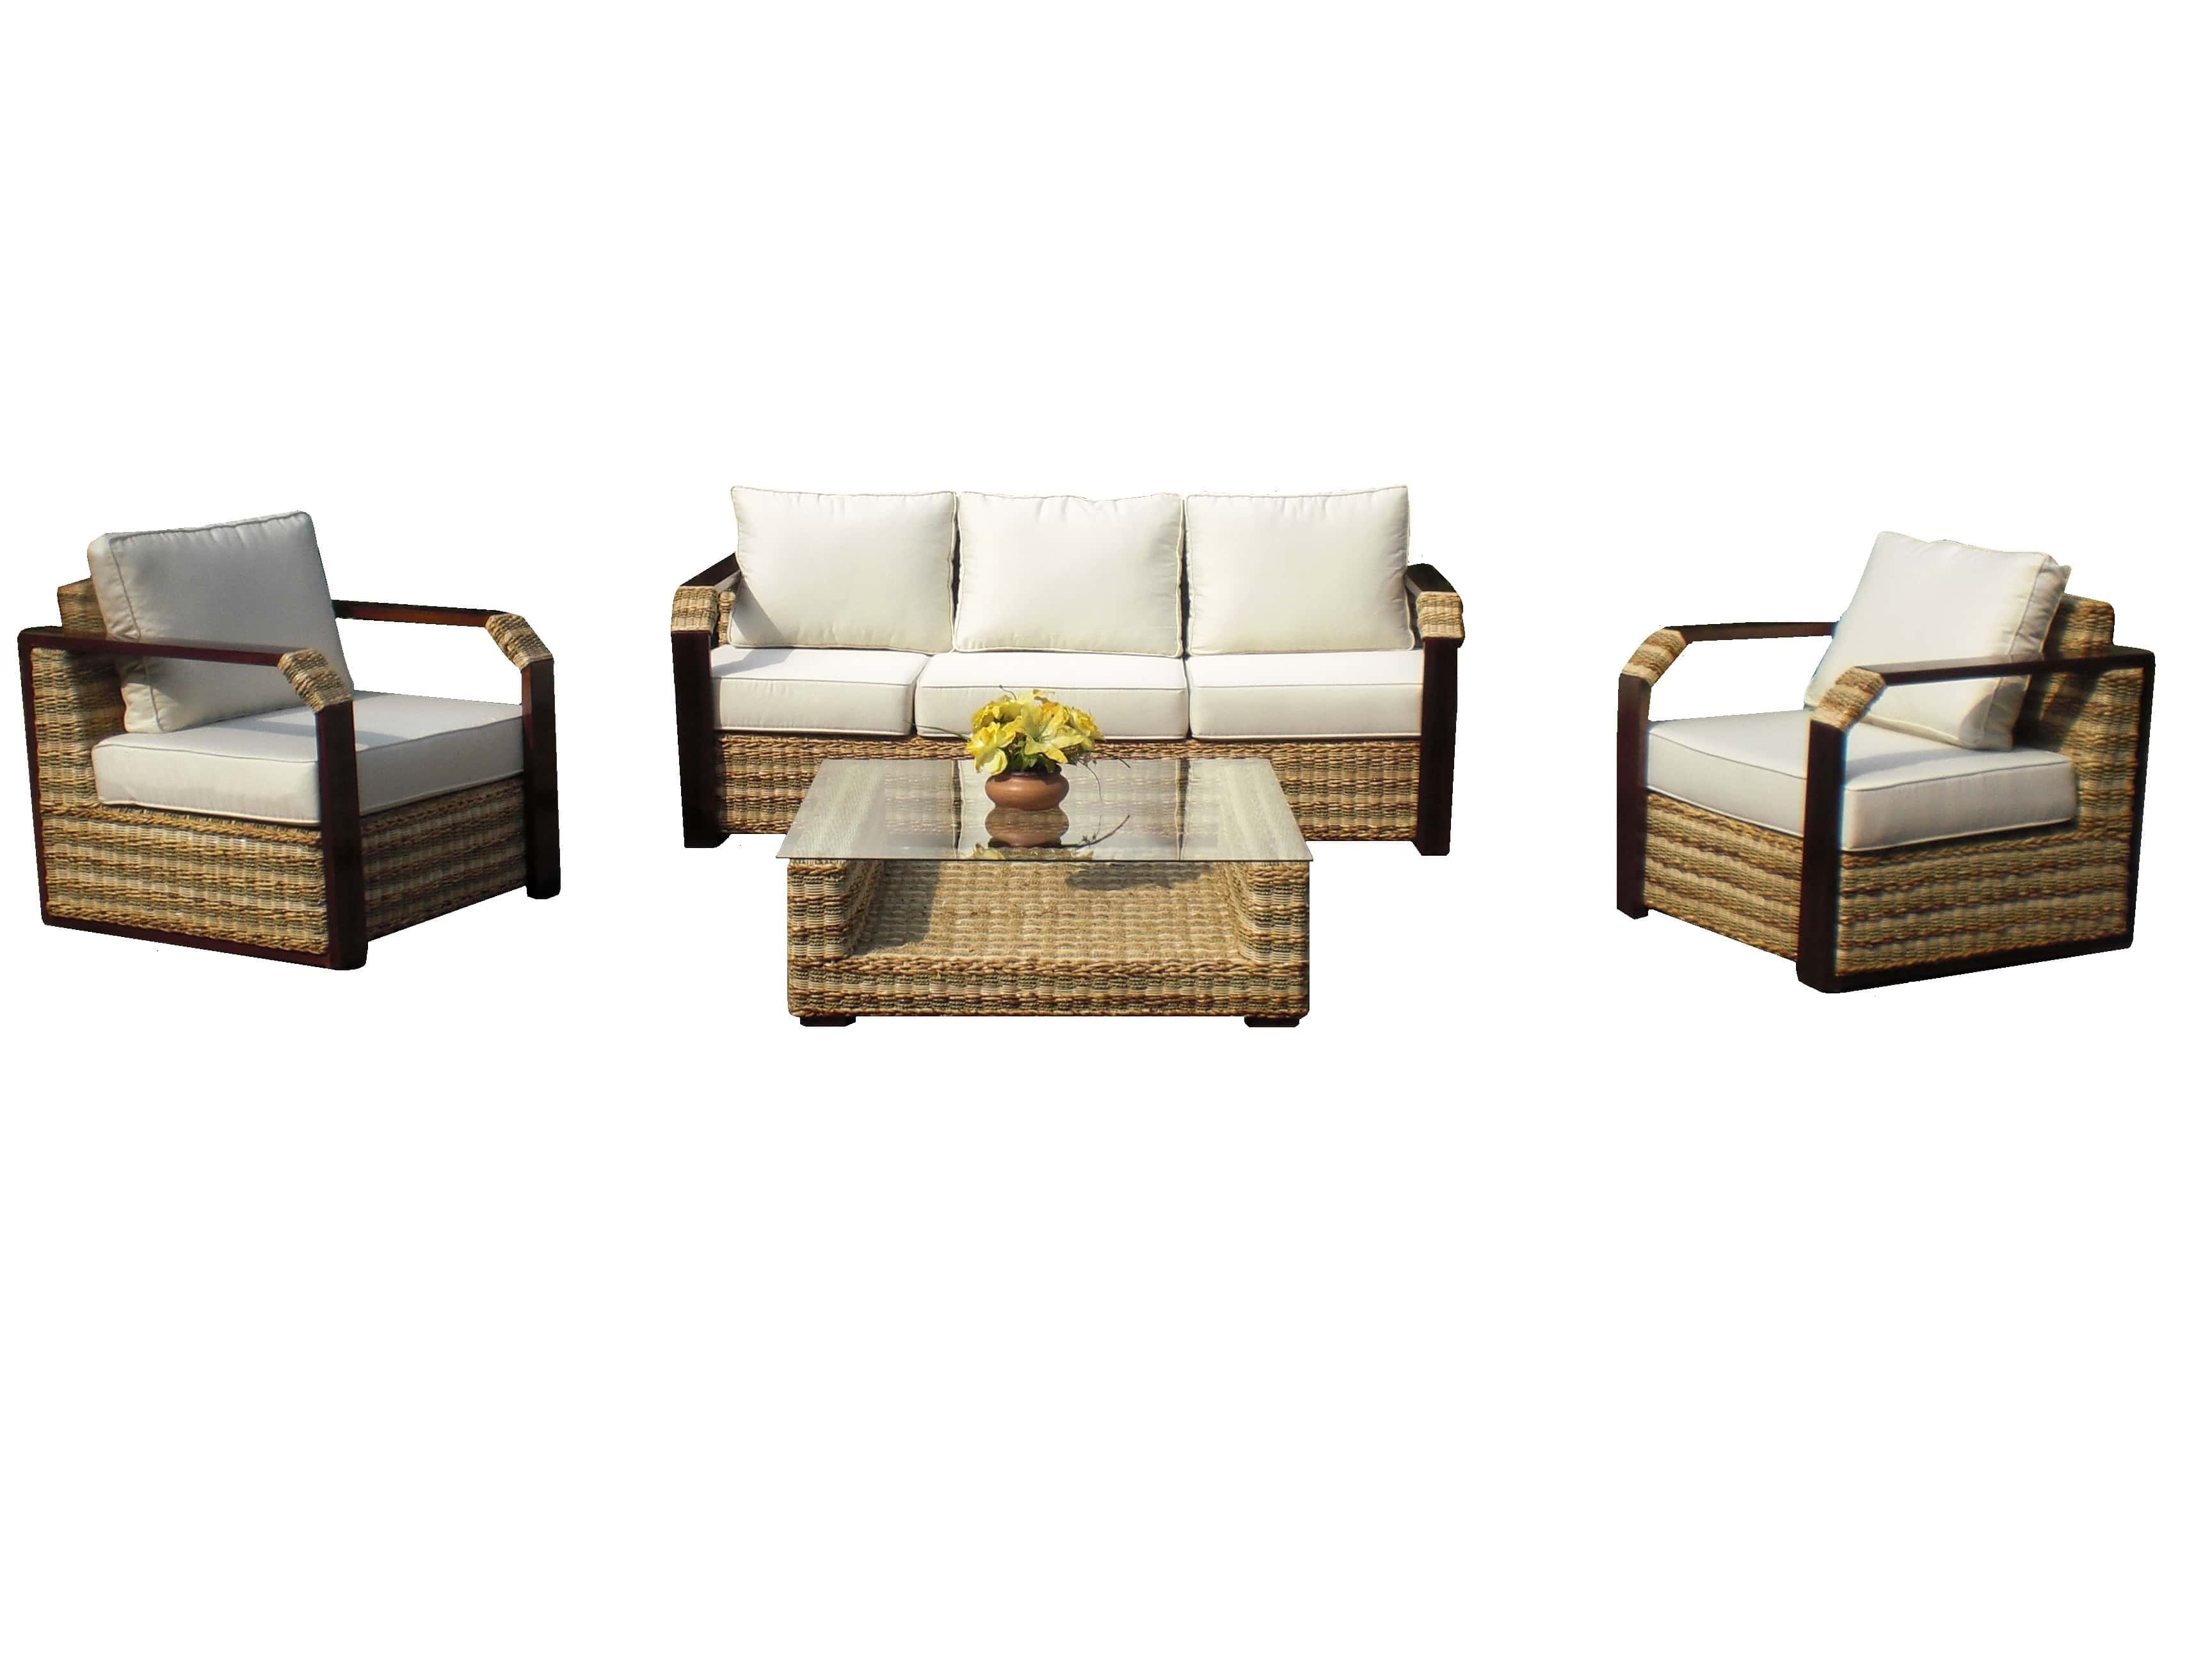 Seagrass Sectional Sofa For Indoor Or Outdoor Design